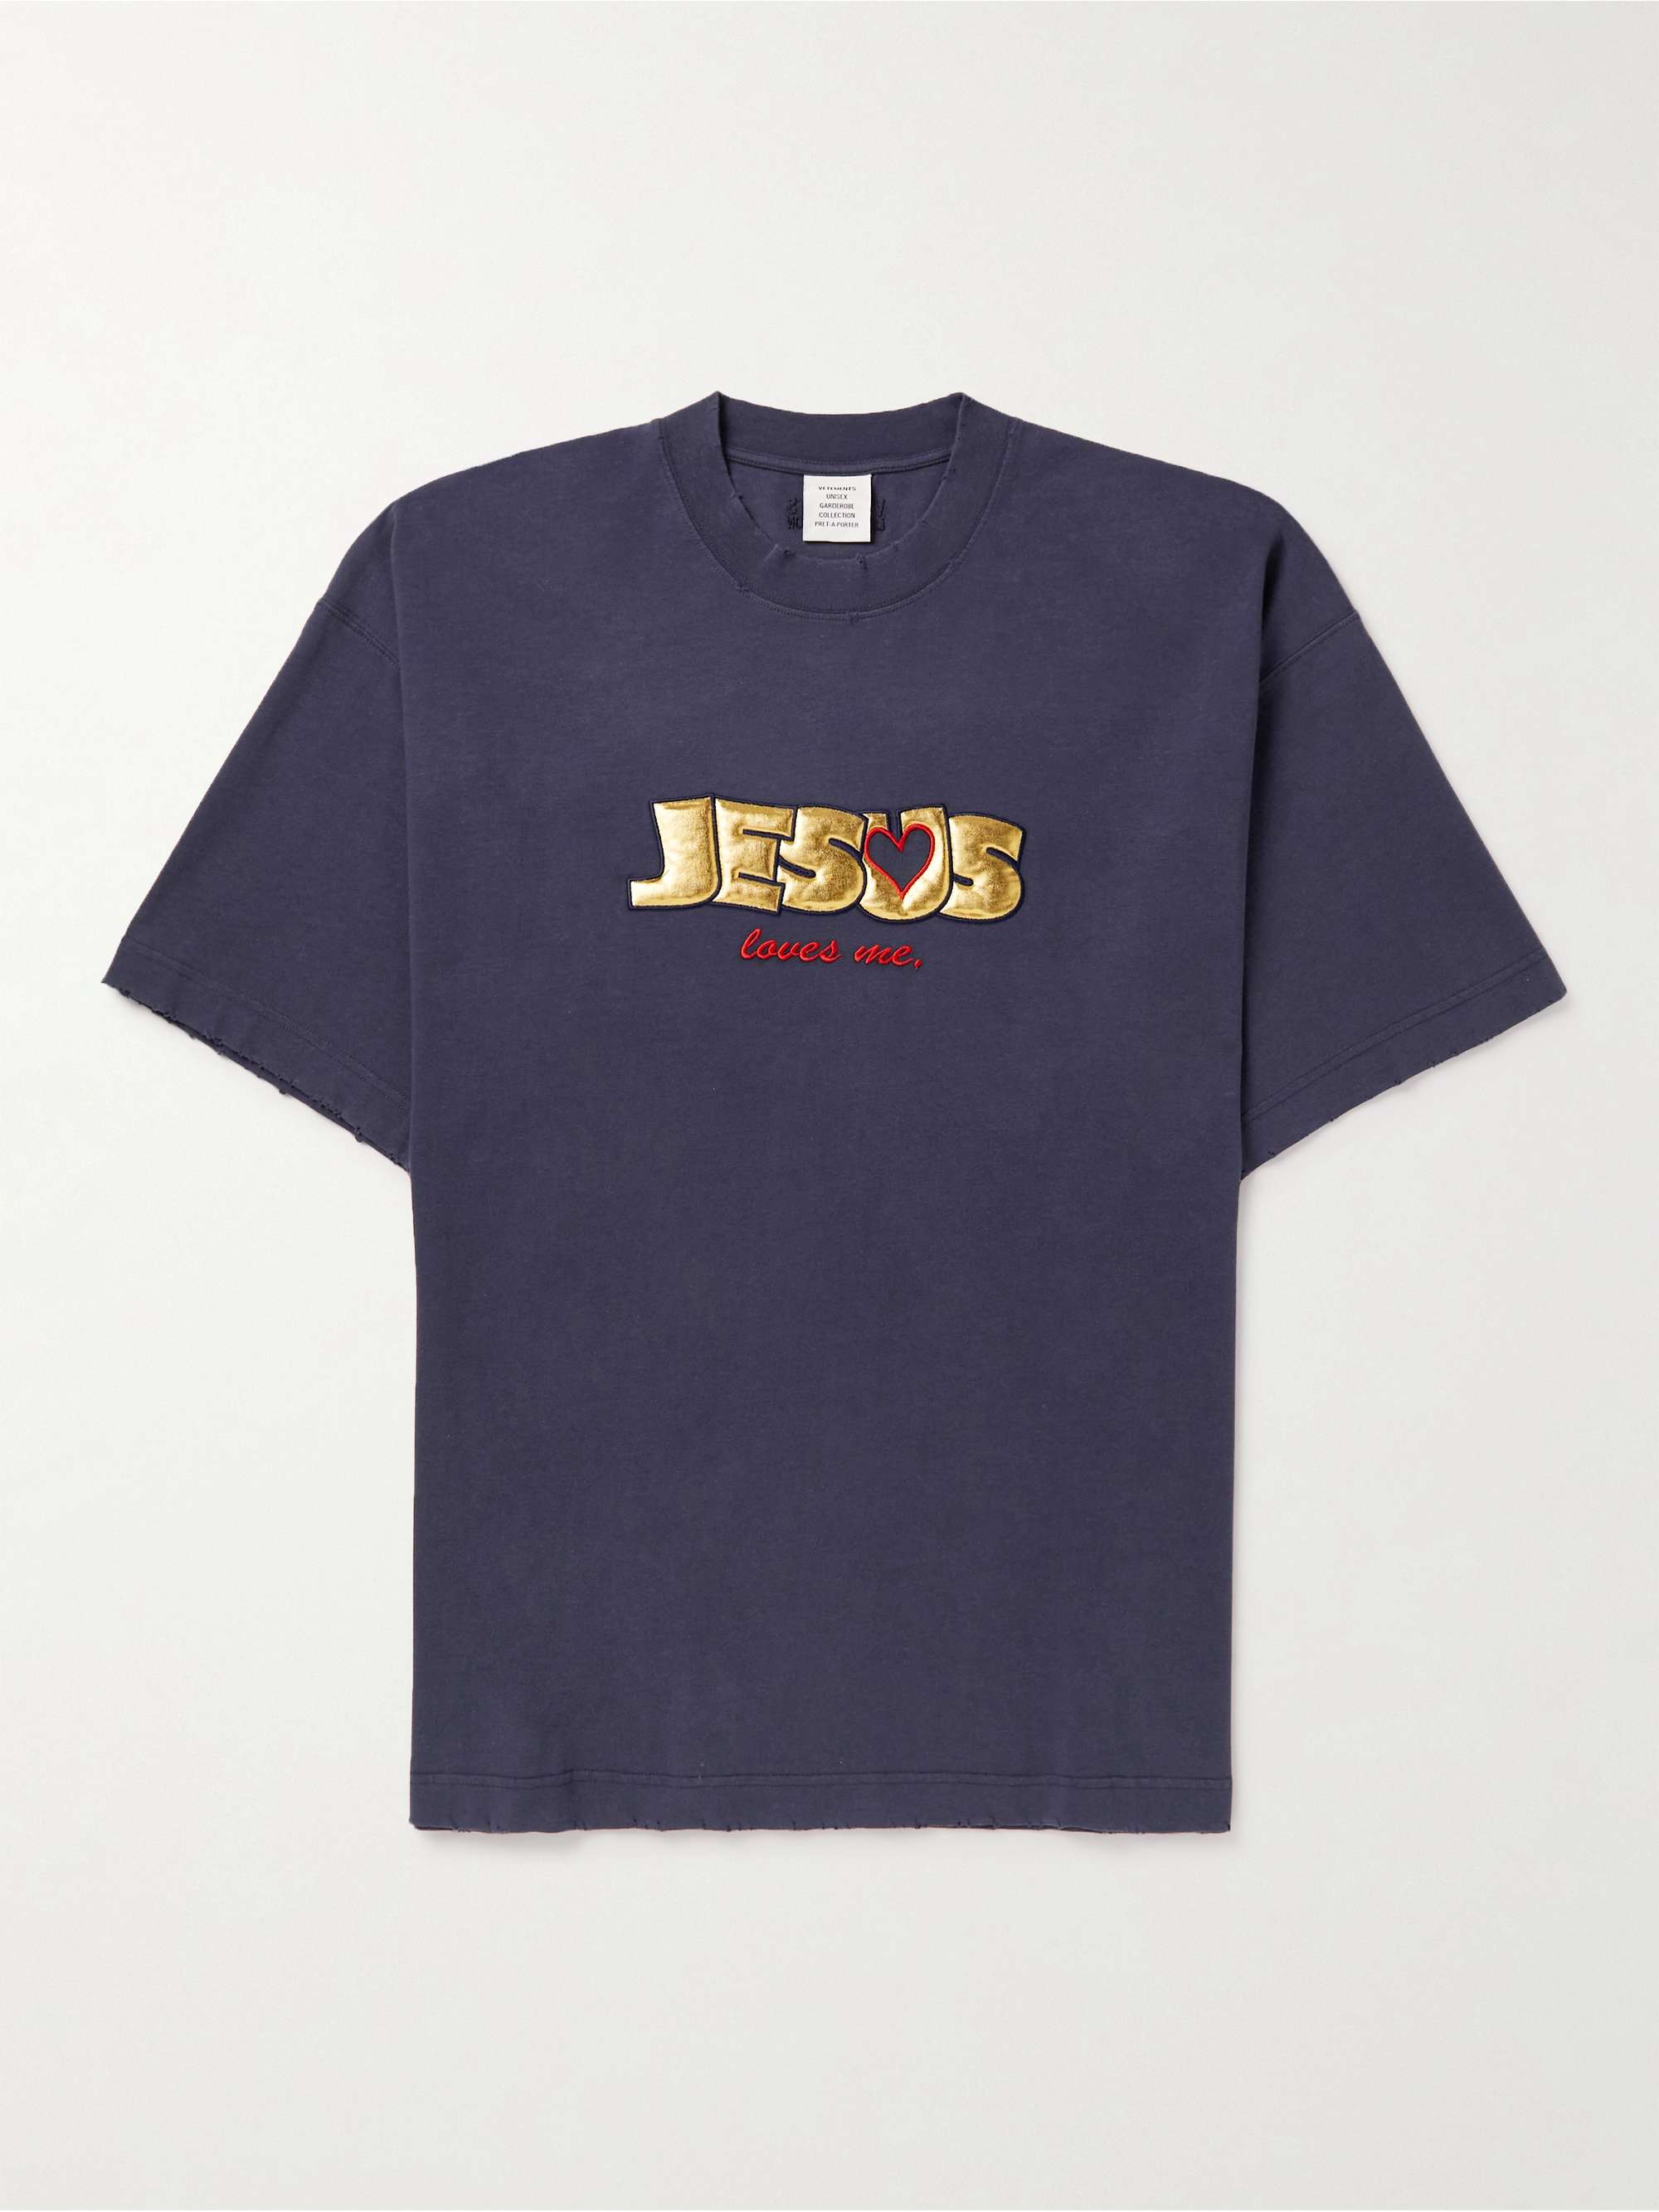 VETEMENTS Oversized Distressed Appliqued Cotton-Jersey T-Shirt